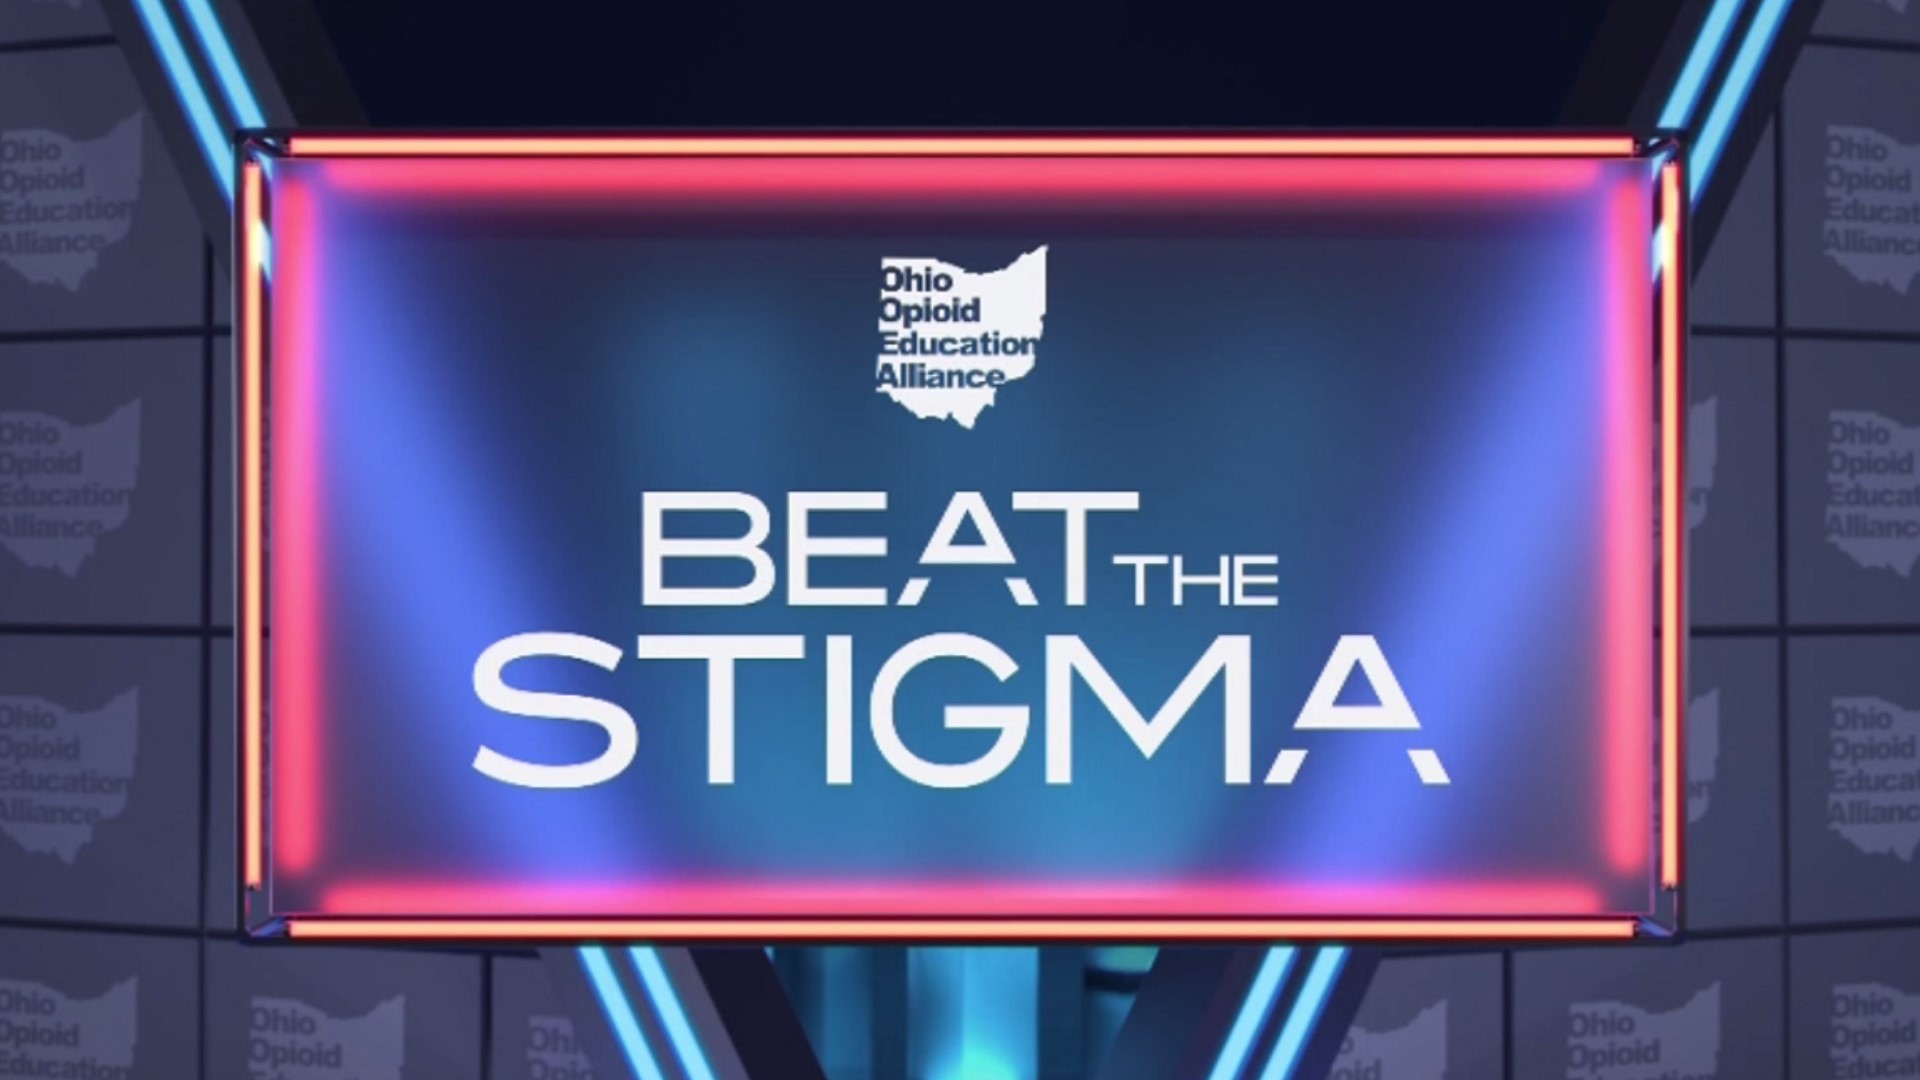 The stigmas surrounding addiction and recovery are very real, but so is the hope for change. Join the conversation around the truth... and beat the stigma.